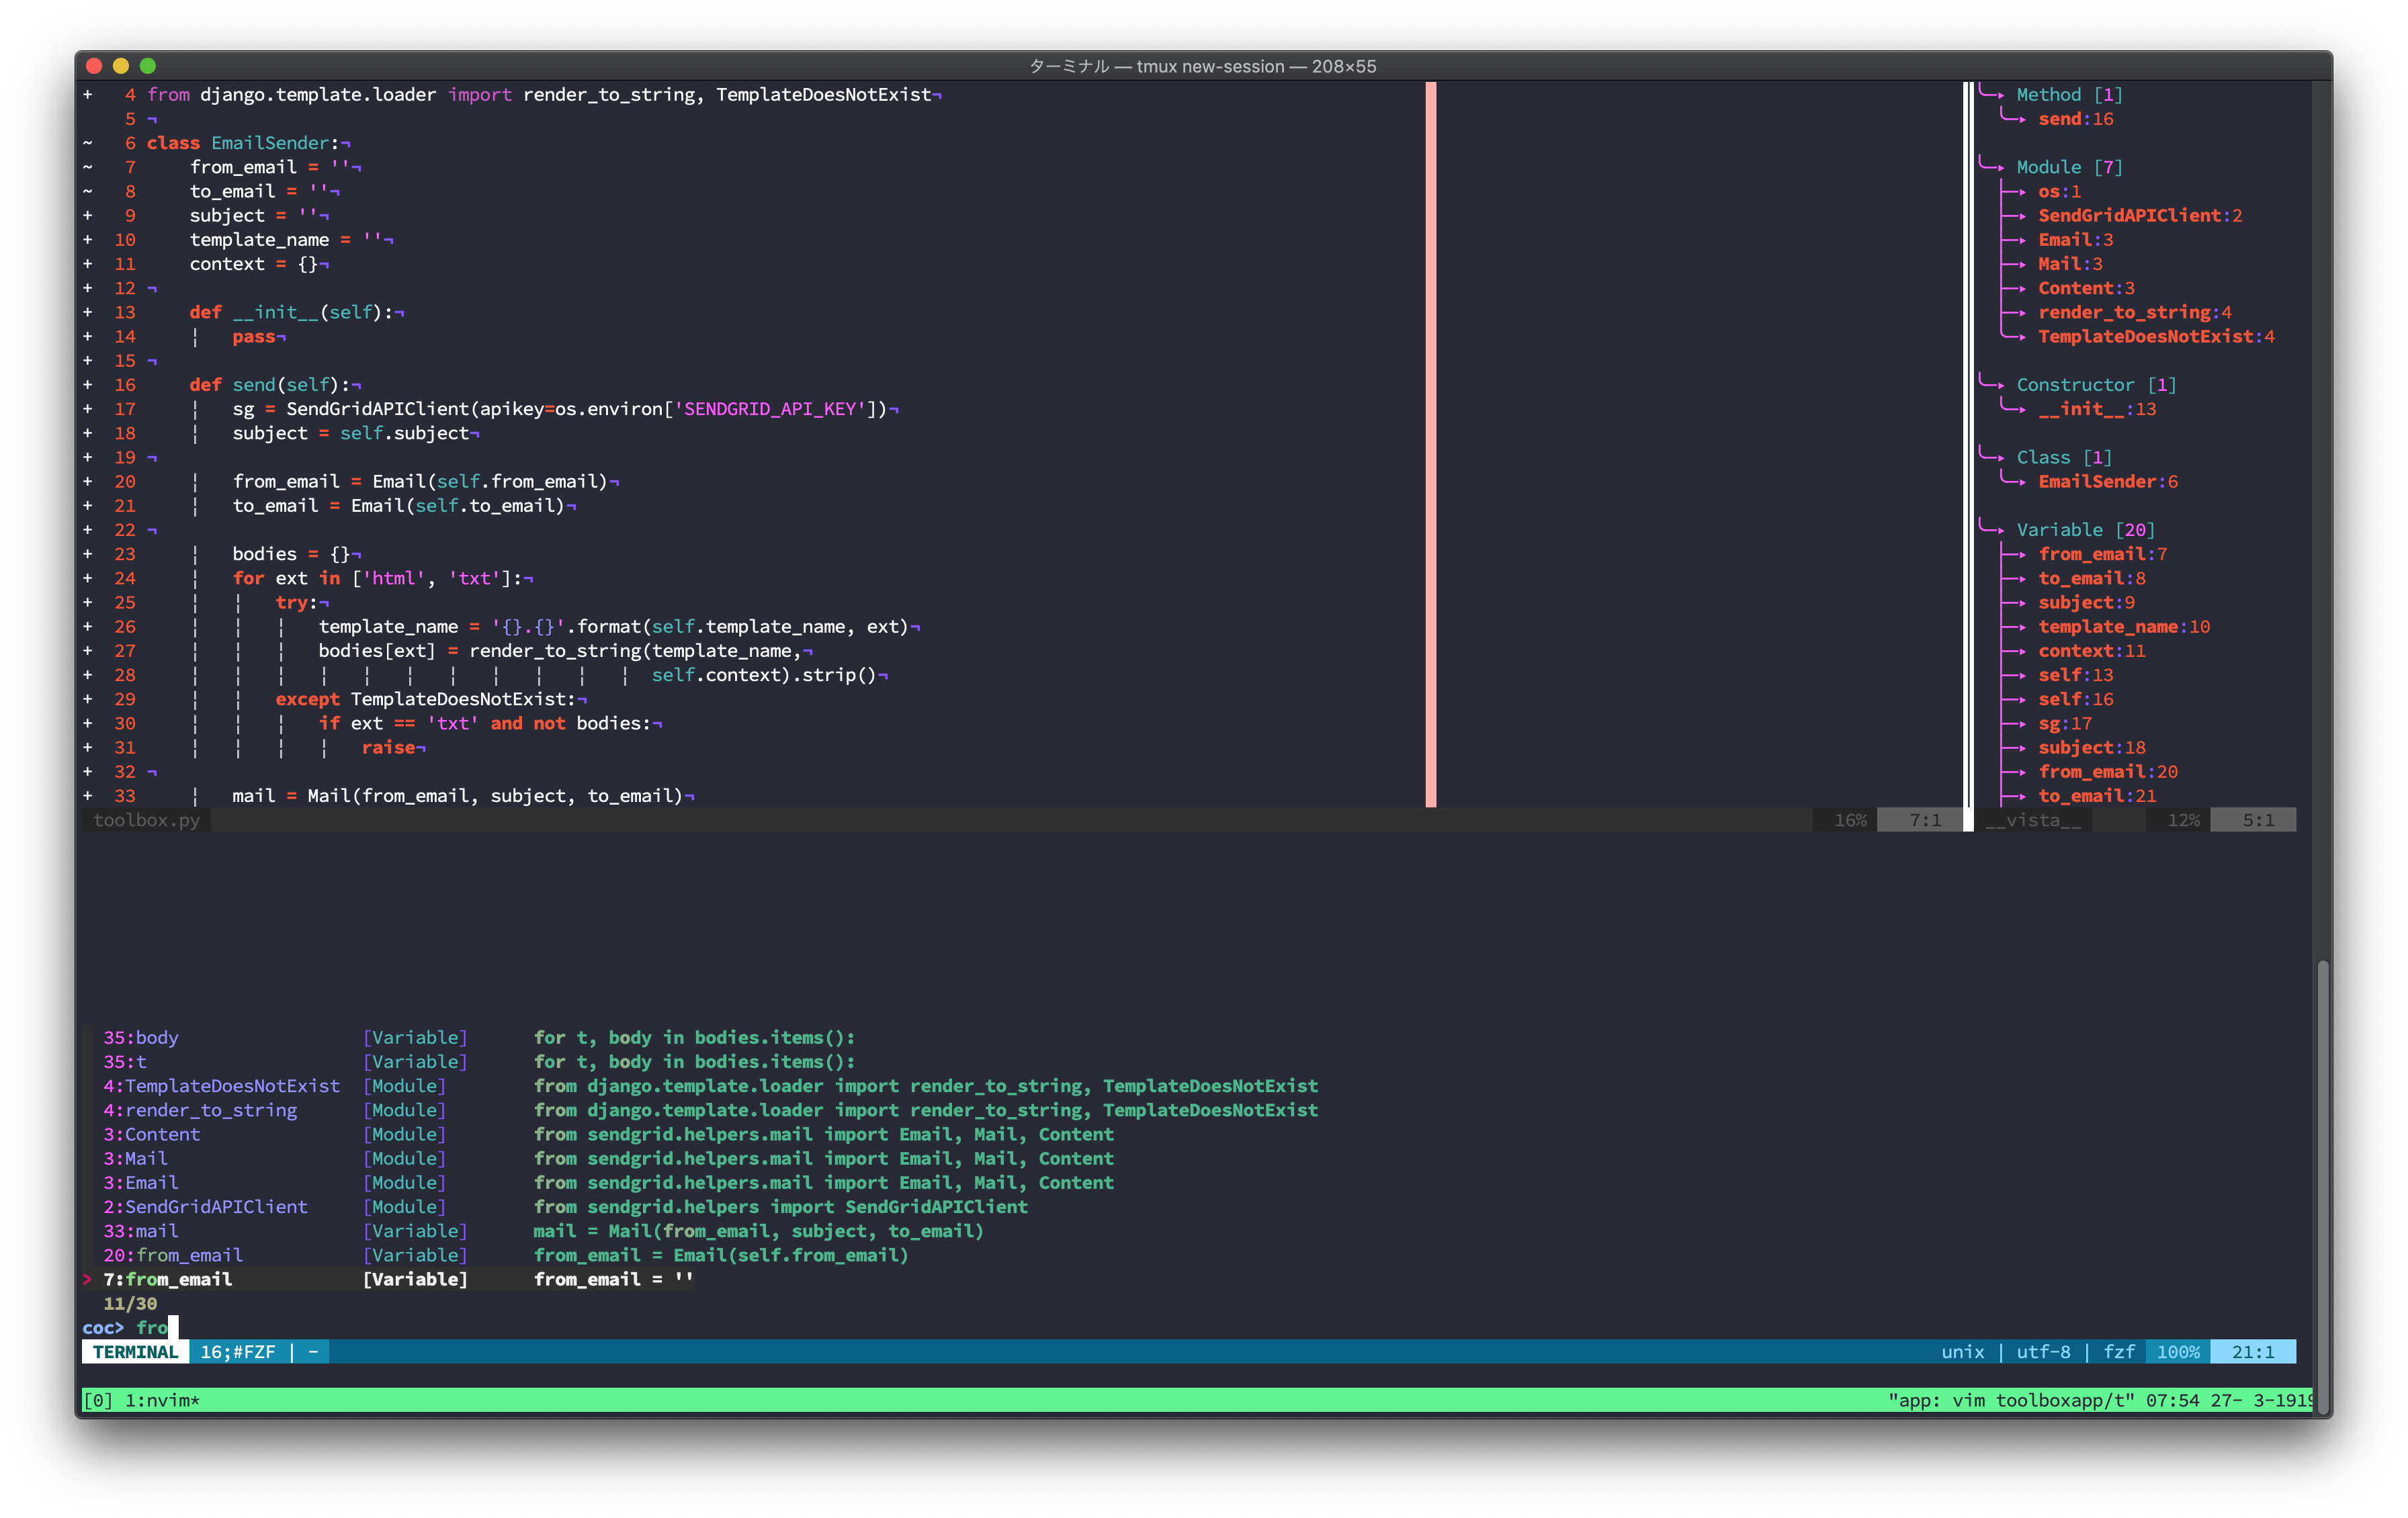 vista.vim is awesome